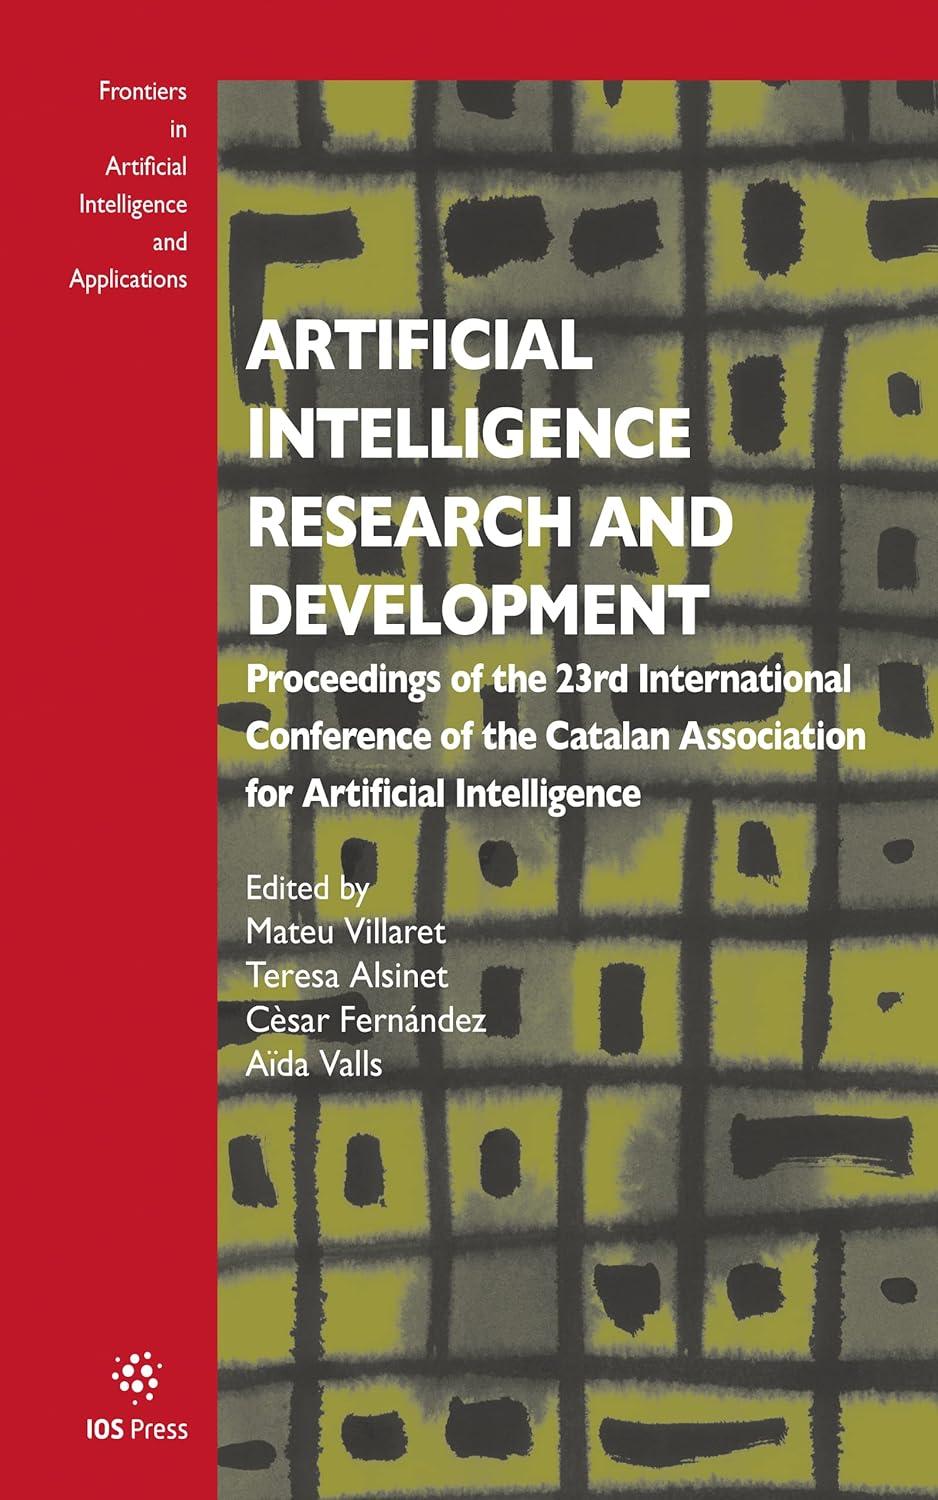 artificial intelligence research and development proceedings of the 23rd international conference of the